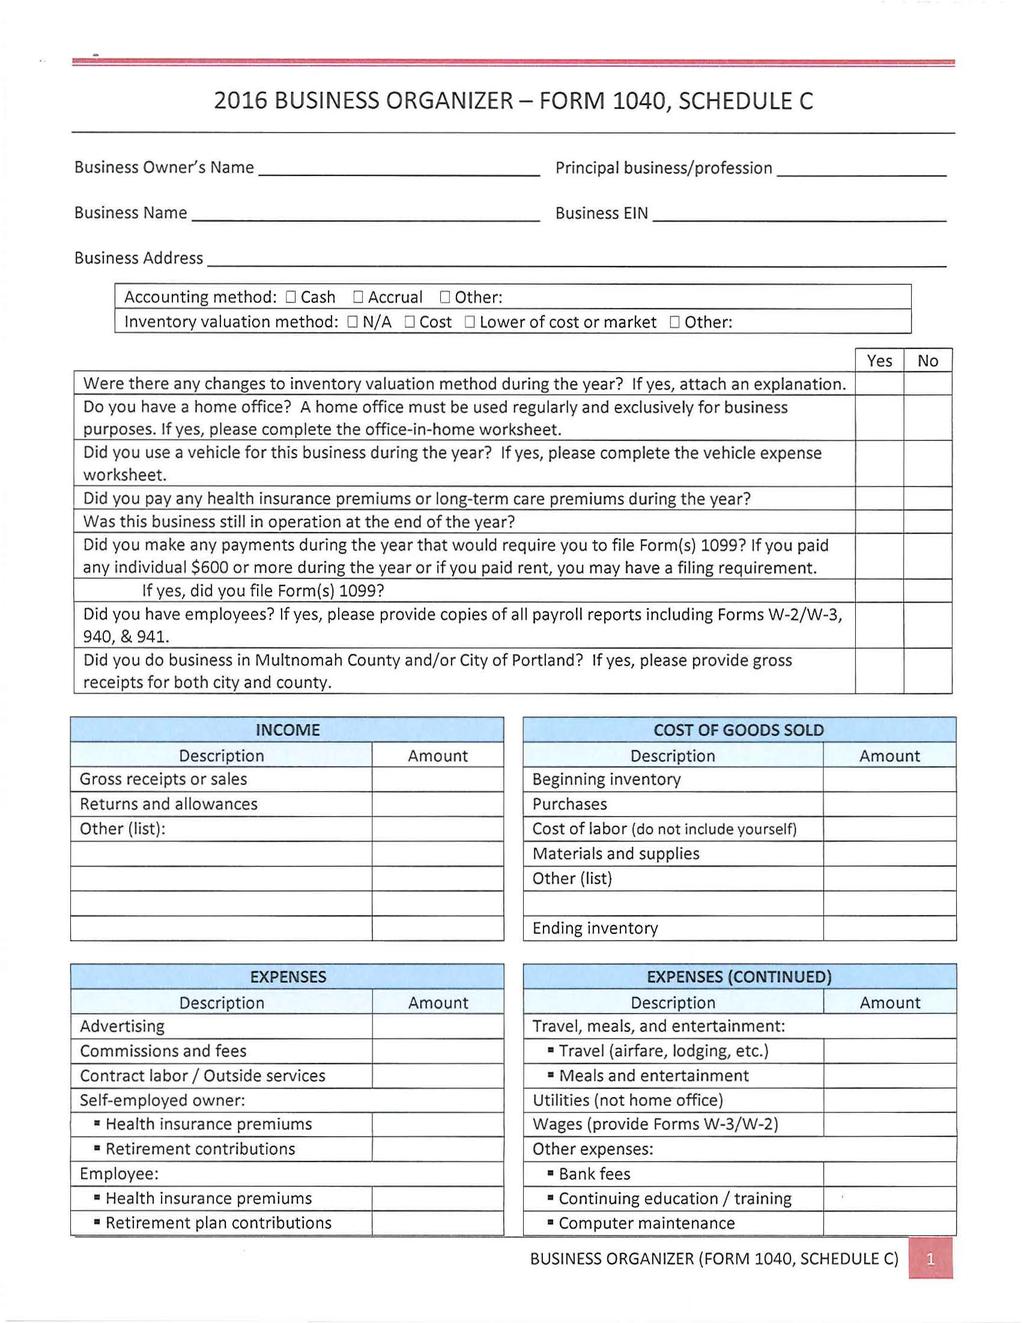 2016 BUSINESS ORGANIZER- FORM 1040, SCHEDULE C Business Owner's Name -------------- Principal business/profession Business Name----------------- Business EIN -------------- Business Address